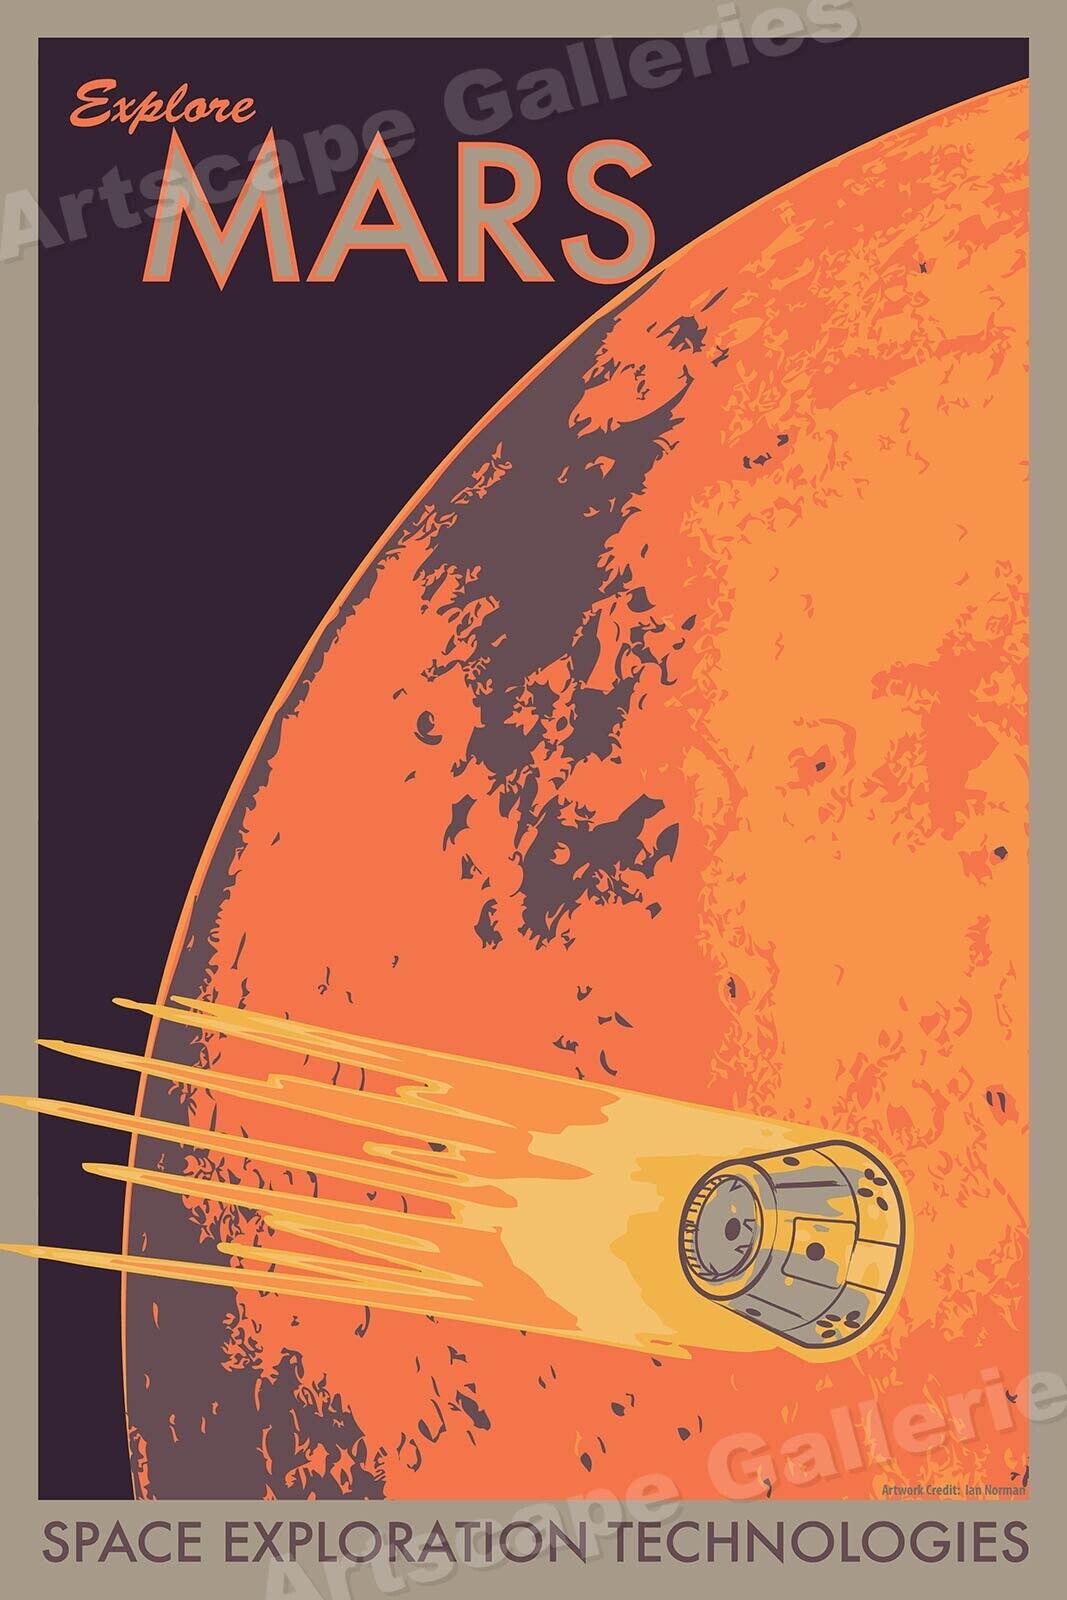 “Explore Mars” Space Exploration Retro Outer Space Travel Poster - 16x24